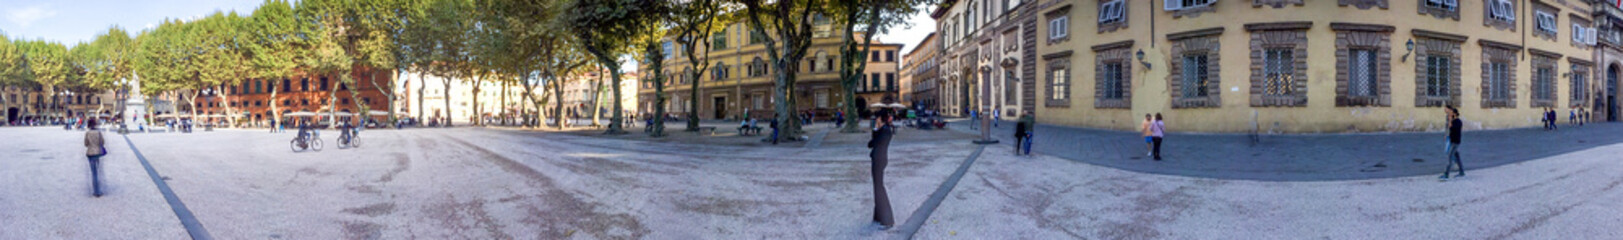 LUCCA, ITALY - OCTOBER 2015: Tourists along Napoleon Square. Lucca attracts 2 million tourists annually